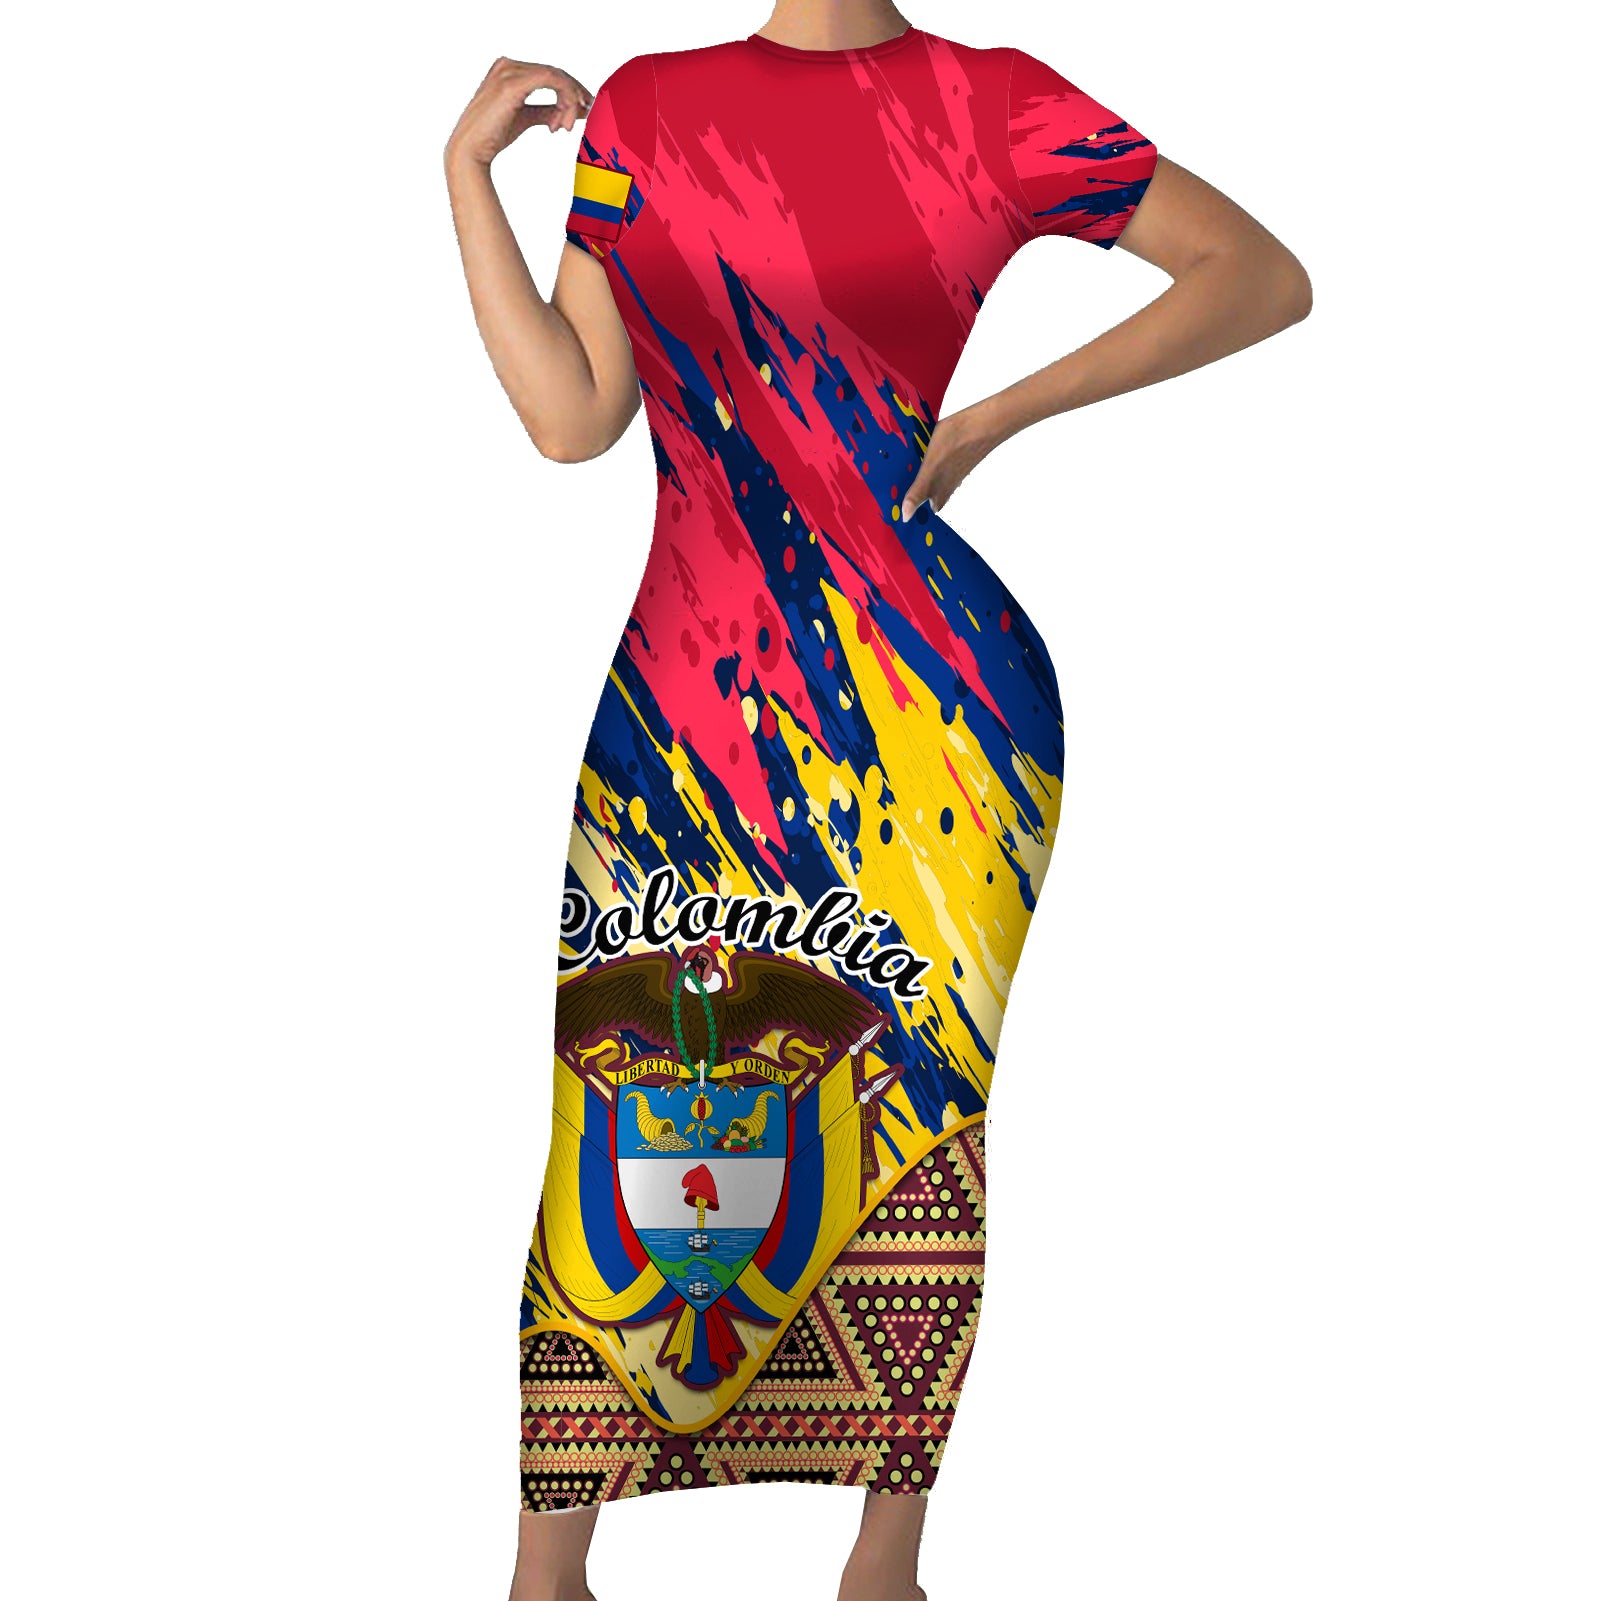 colombia-short-sleeve-bodycon-dress-colombian-tribal-seamless-patterns